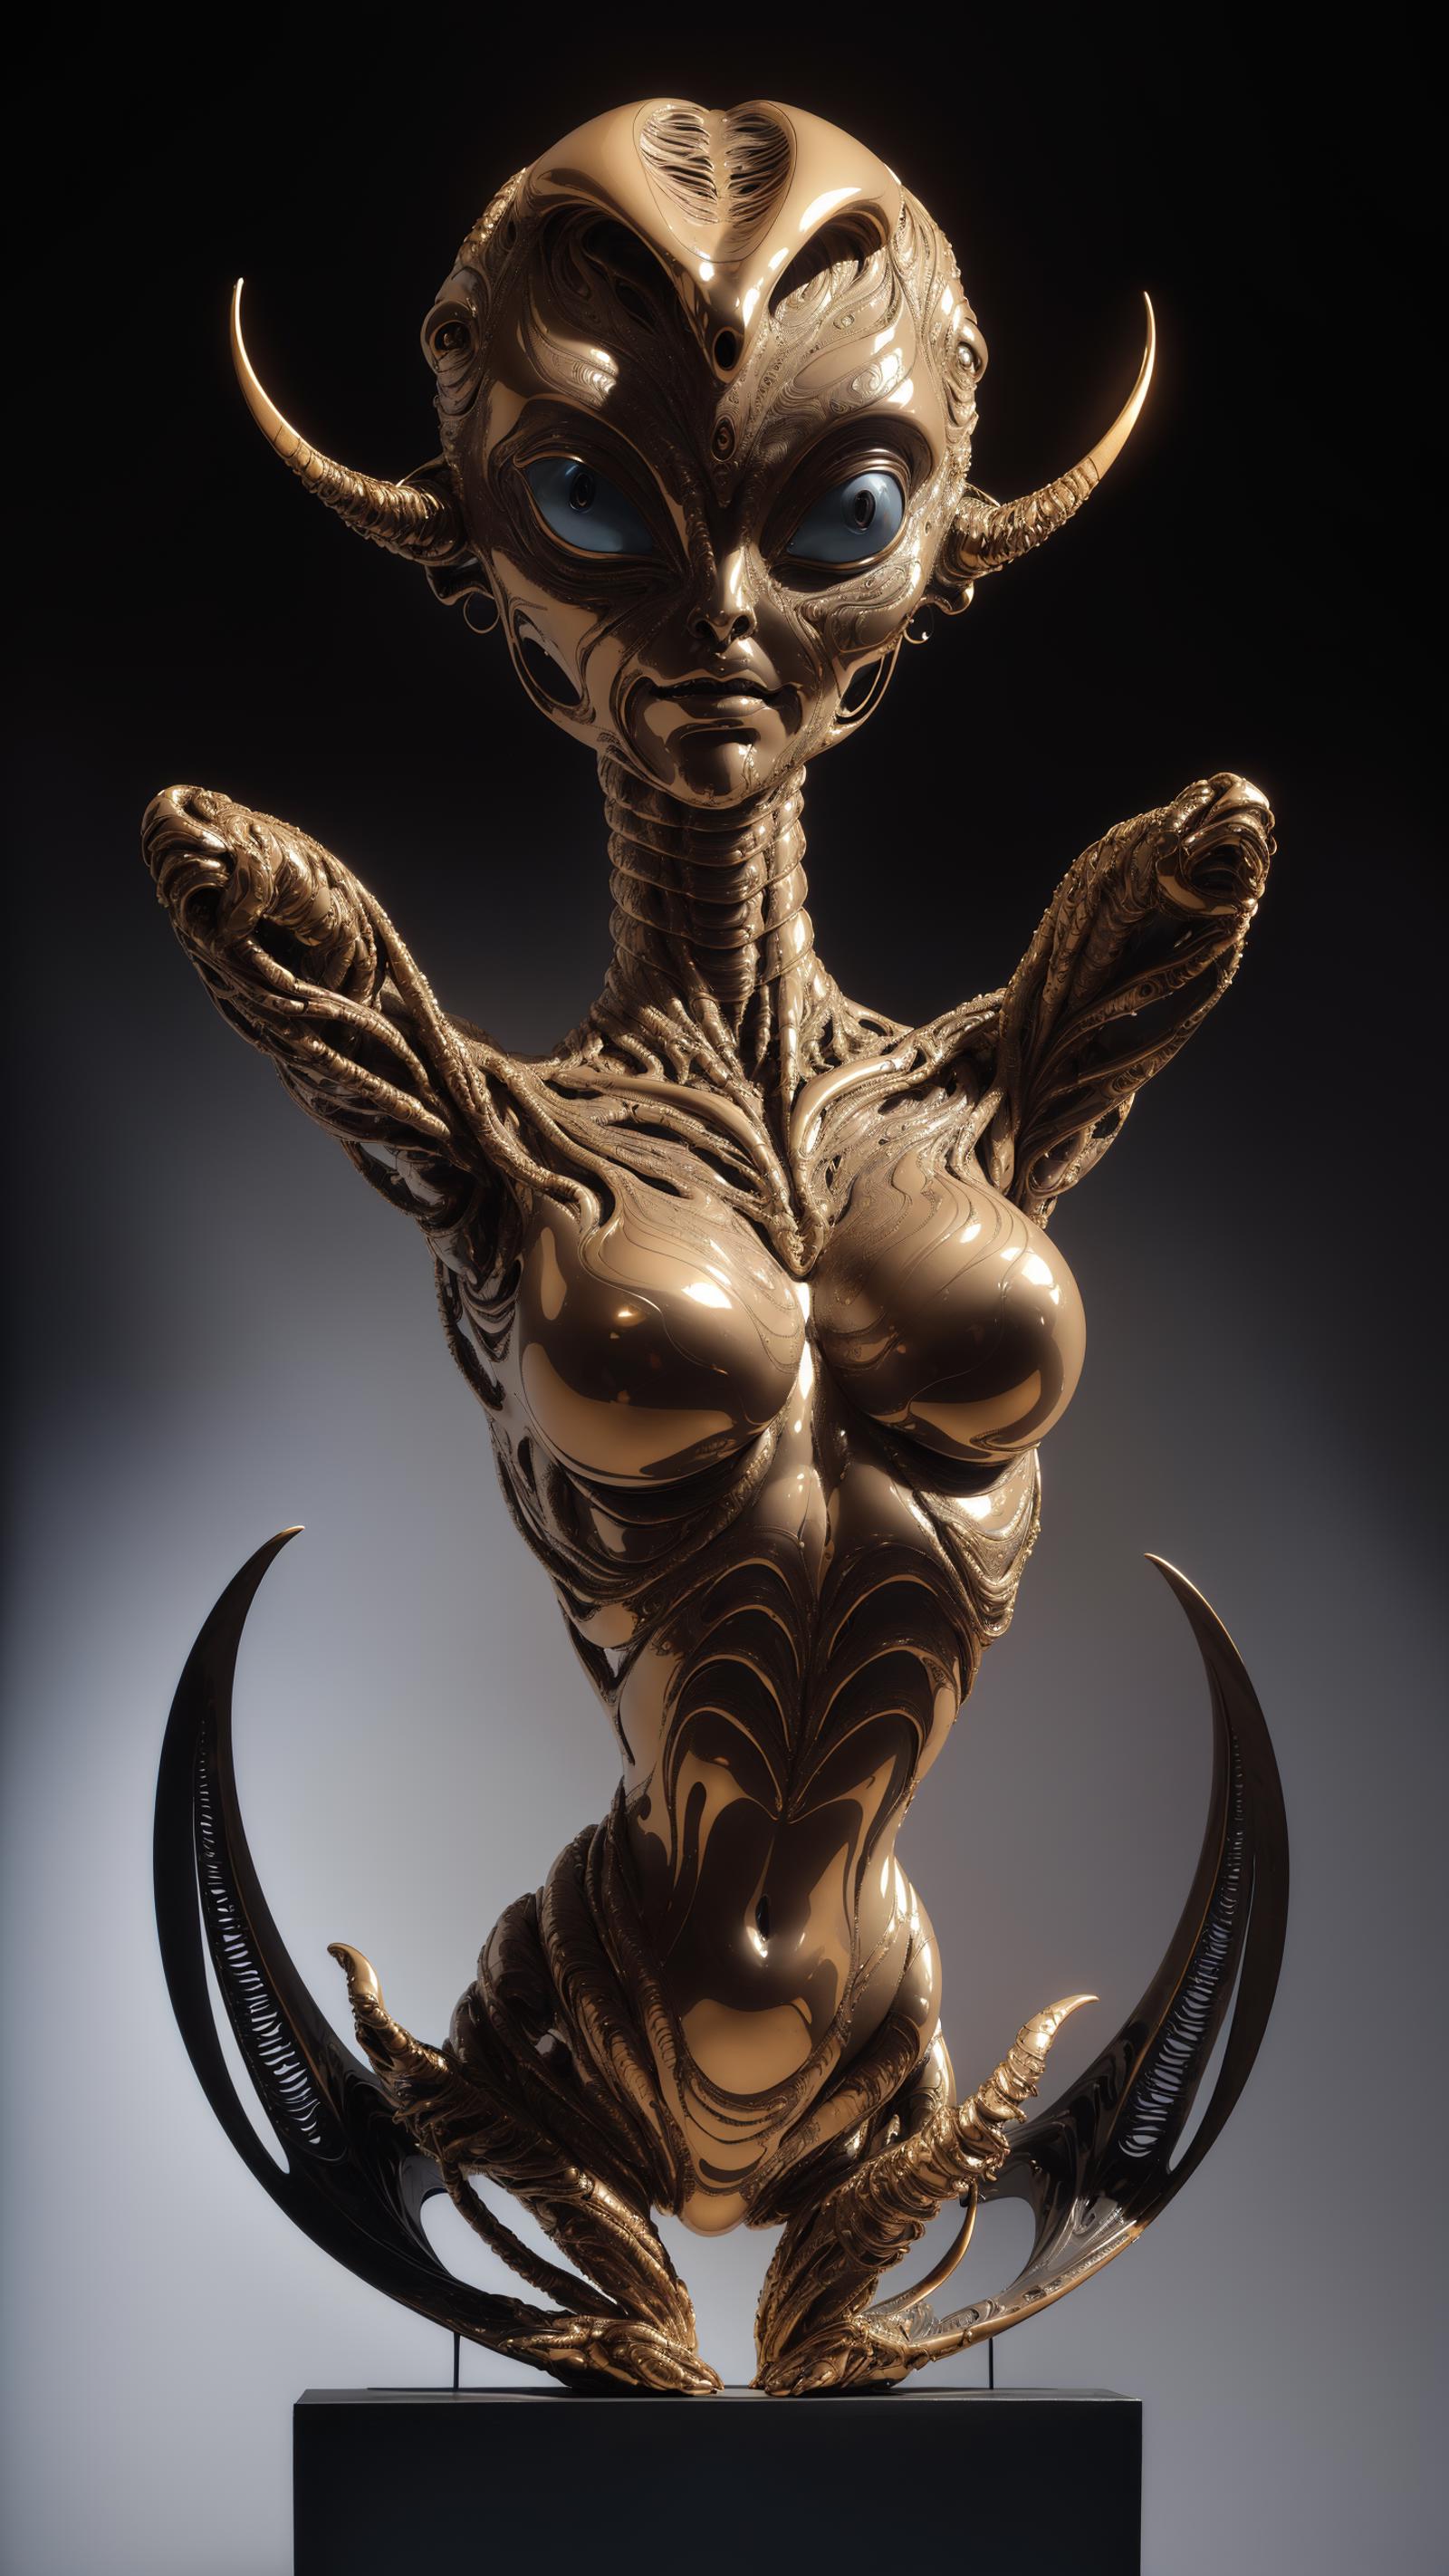 Gold Sculpture of a Female Figure with Horns and Tail